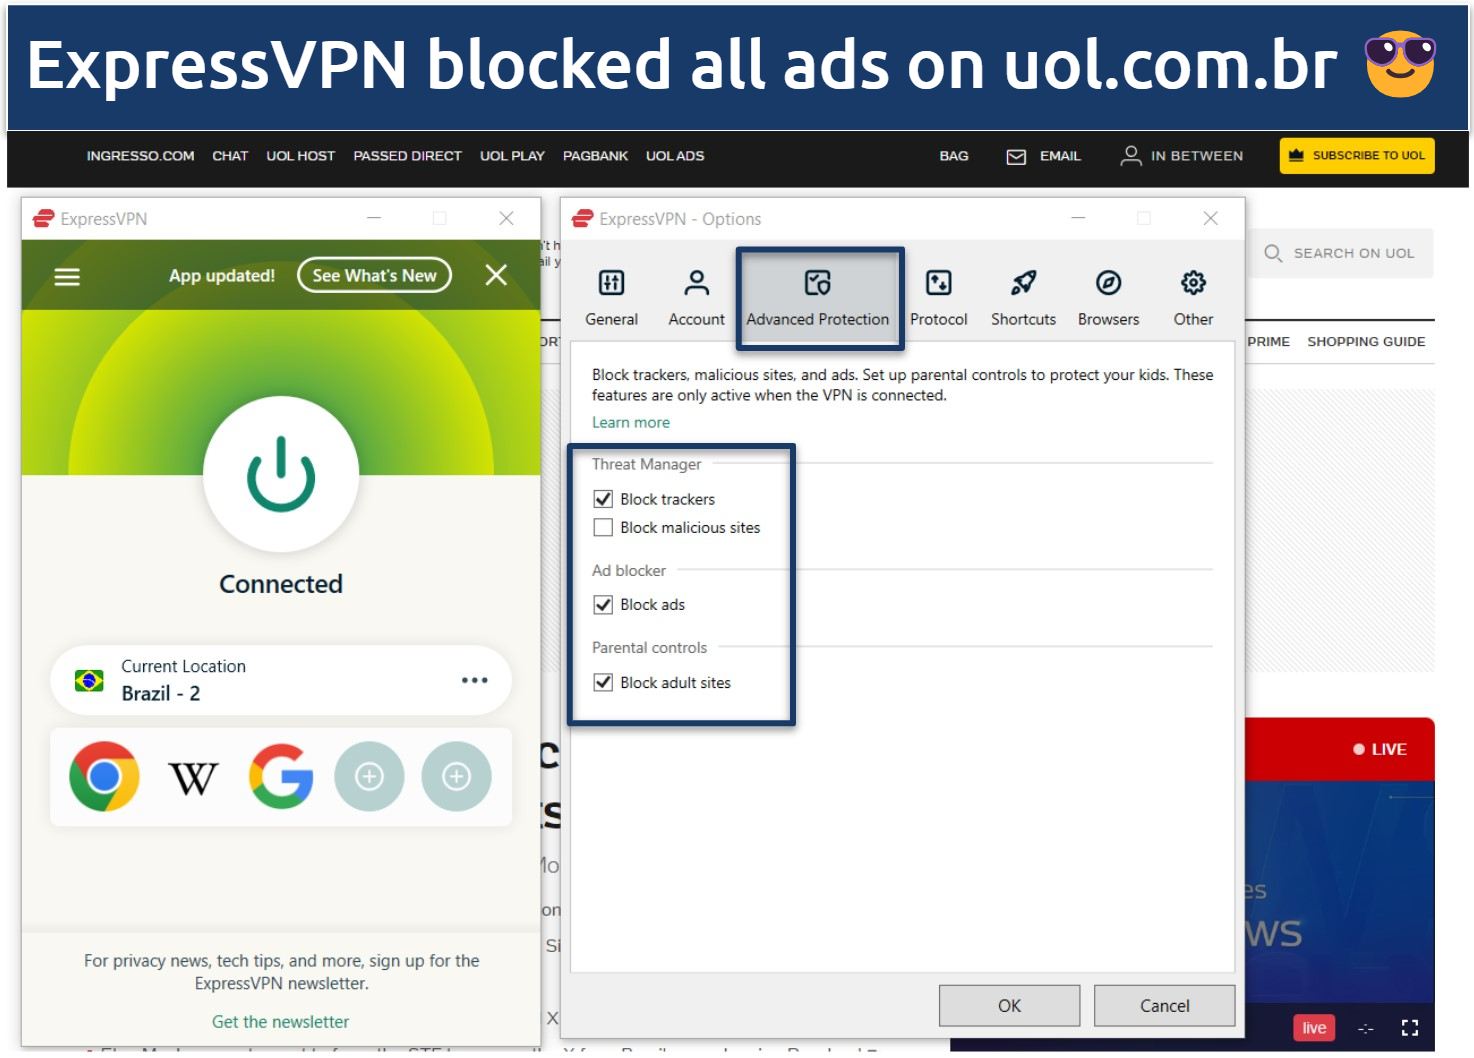 A screenshot of ExpressVPN blocking ads on uol.com br when activating Advanced Protection